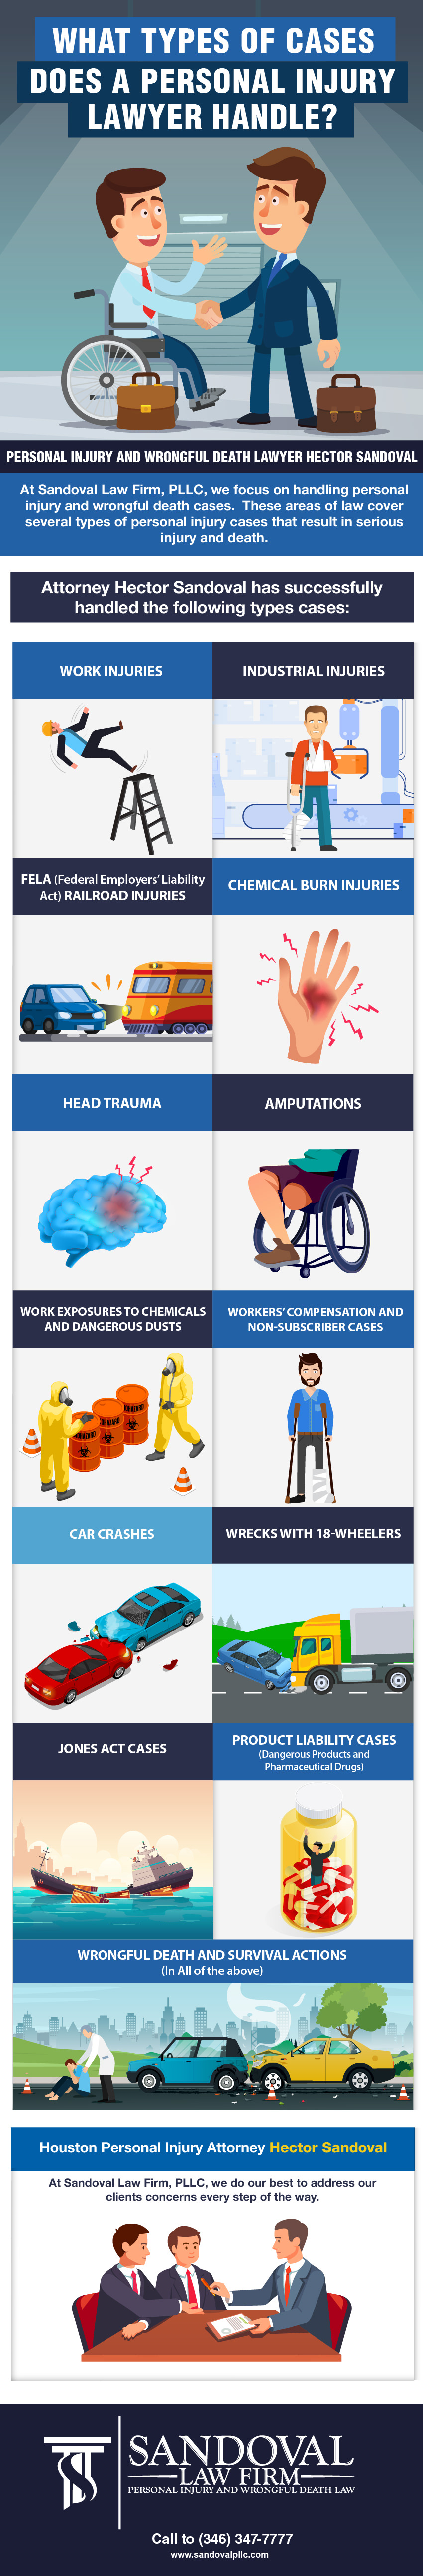 What Types of Cases Does a Personal Injury Lawyer Handle? - Sandoval